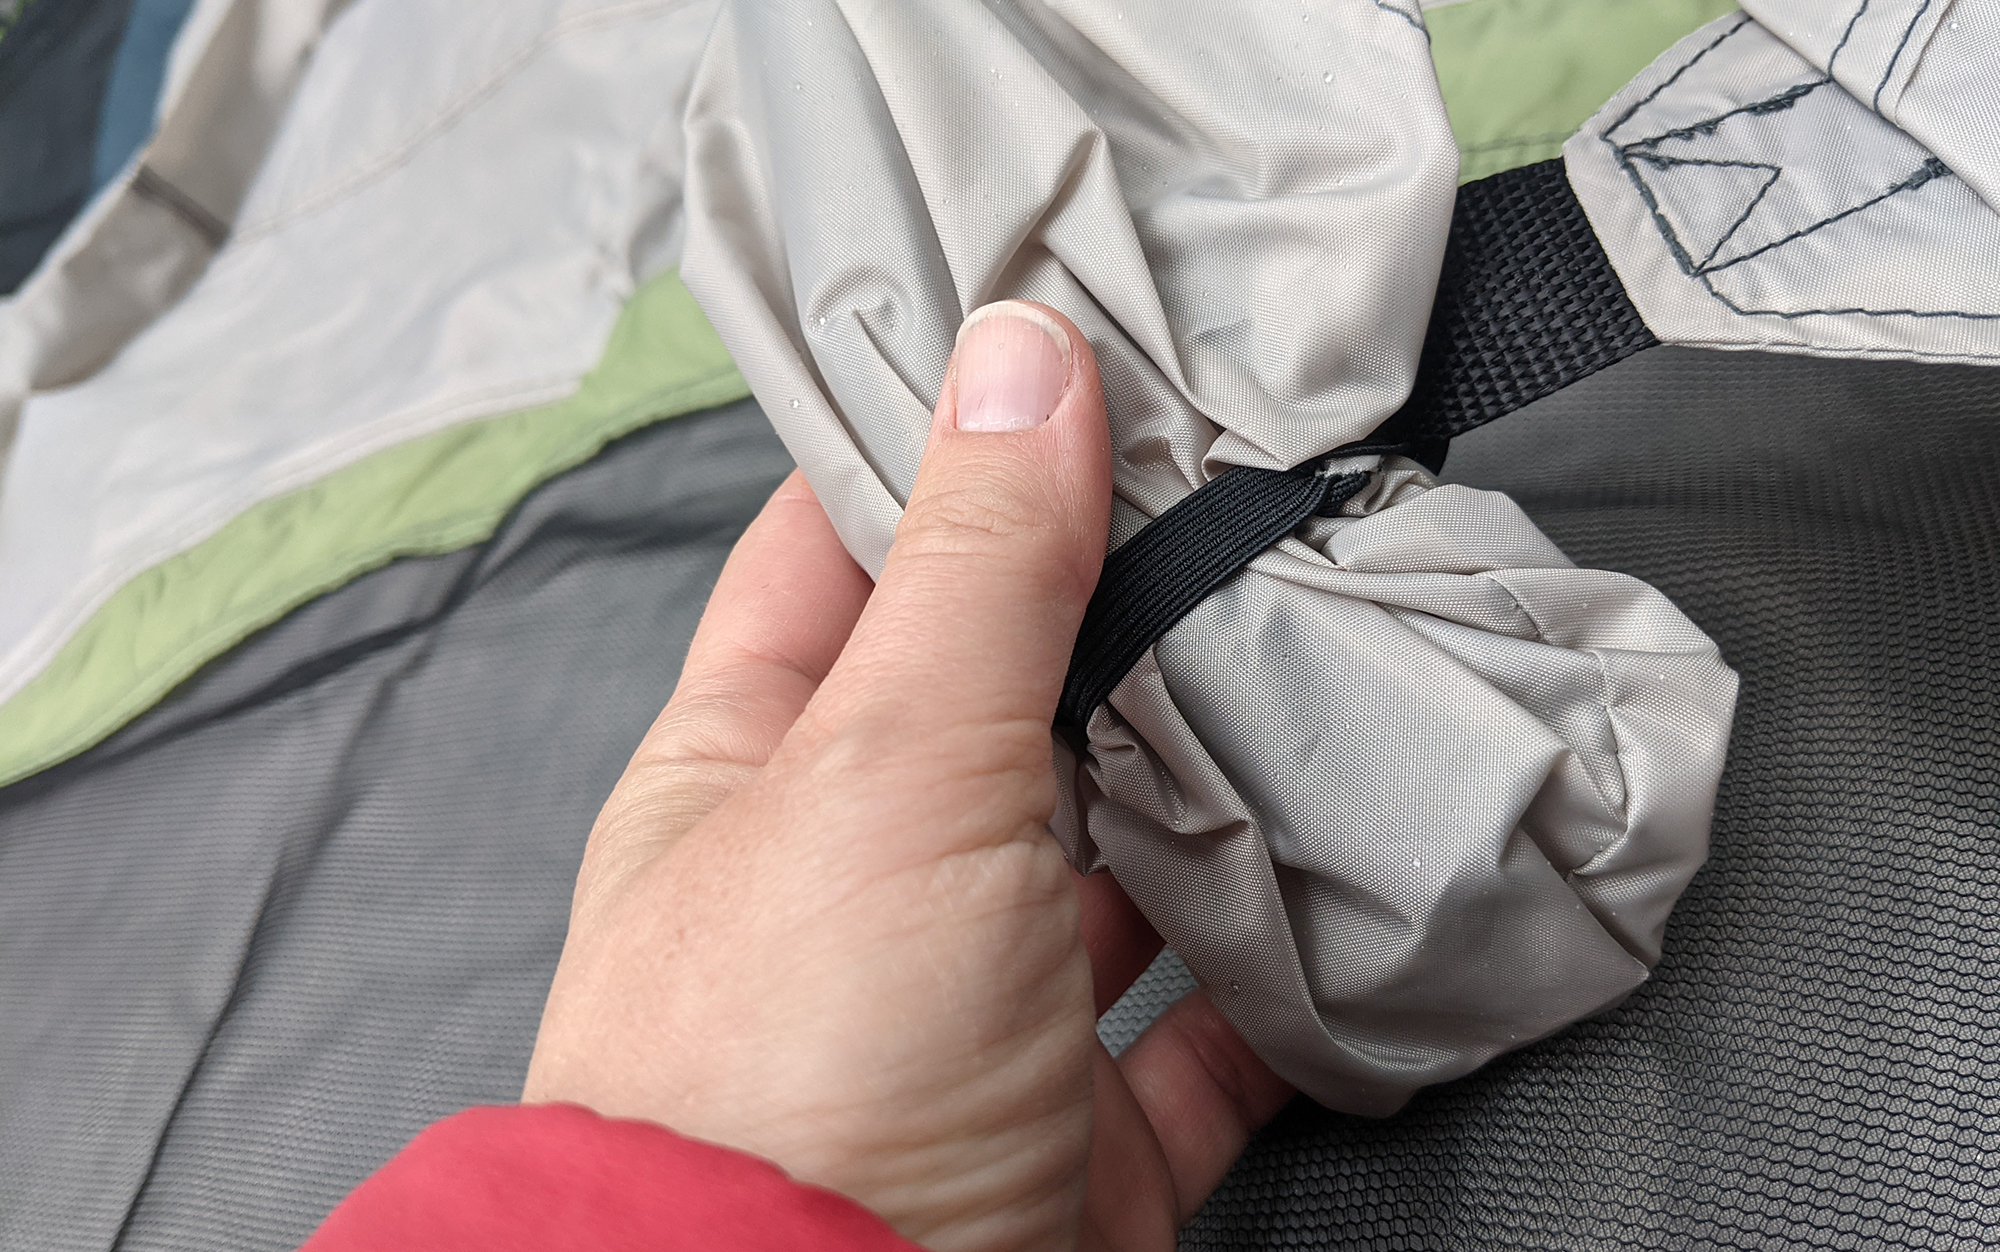 The Ozark's connection points have their own nylon pouch.